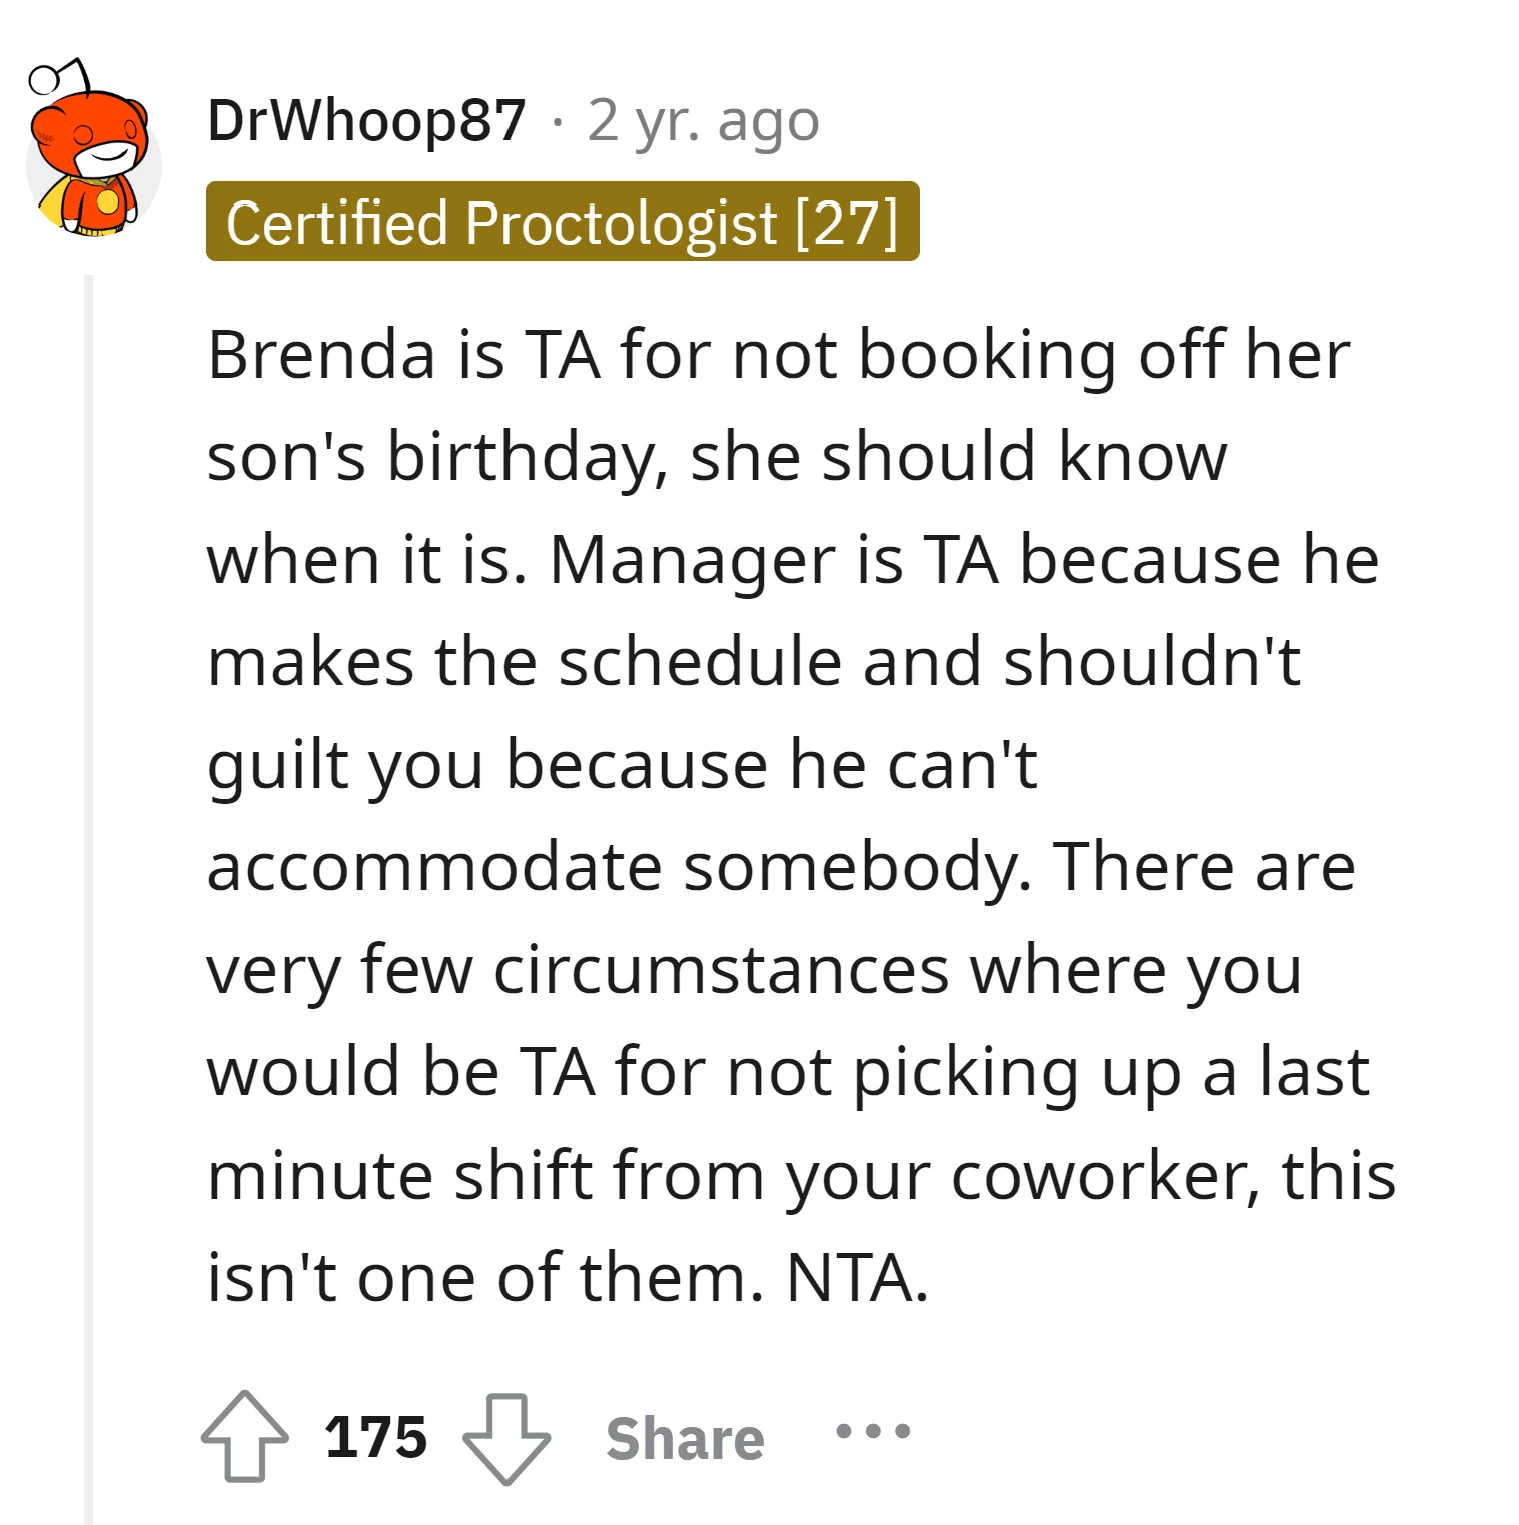 Seems like this is on the manager